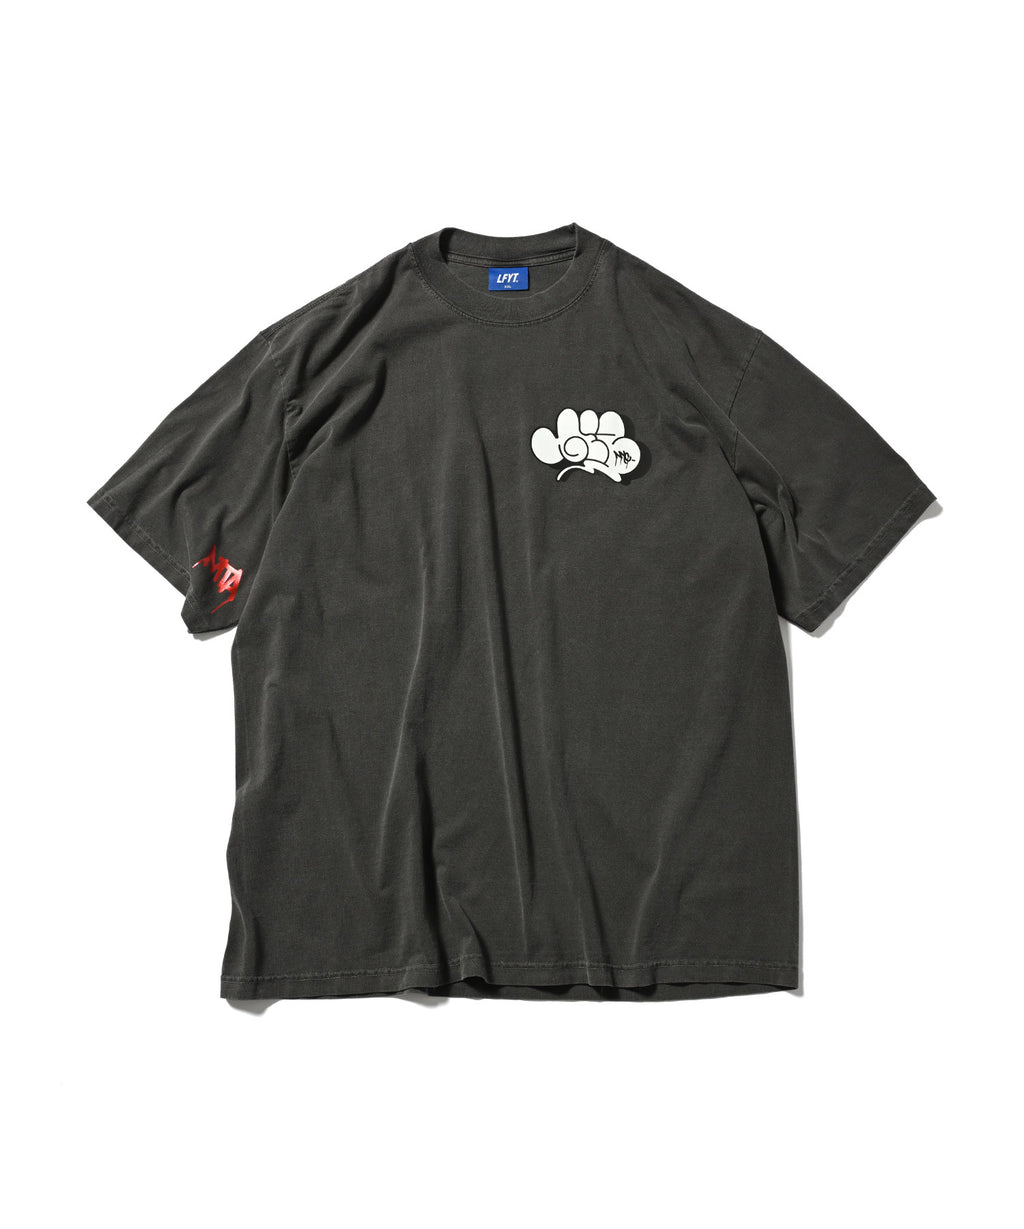 TEES (Tシャツ) のオンライン通販｜LFYT OFFICIAL SITE